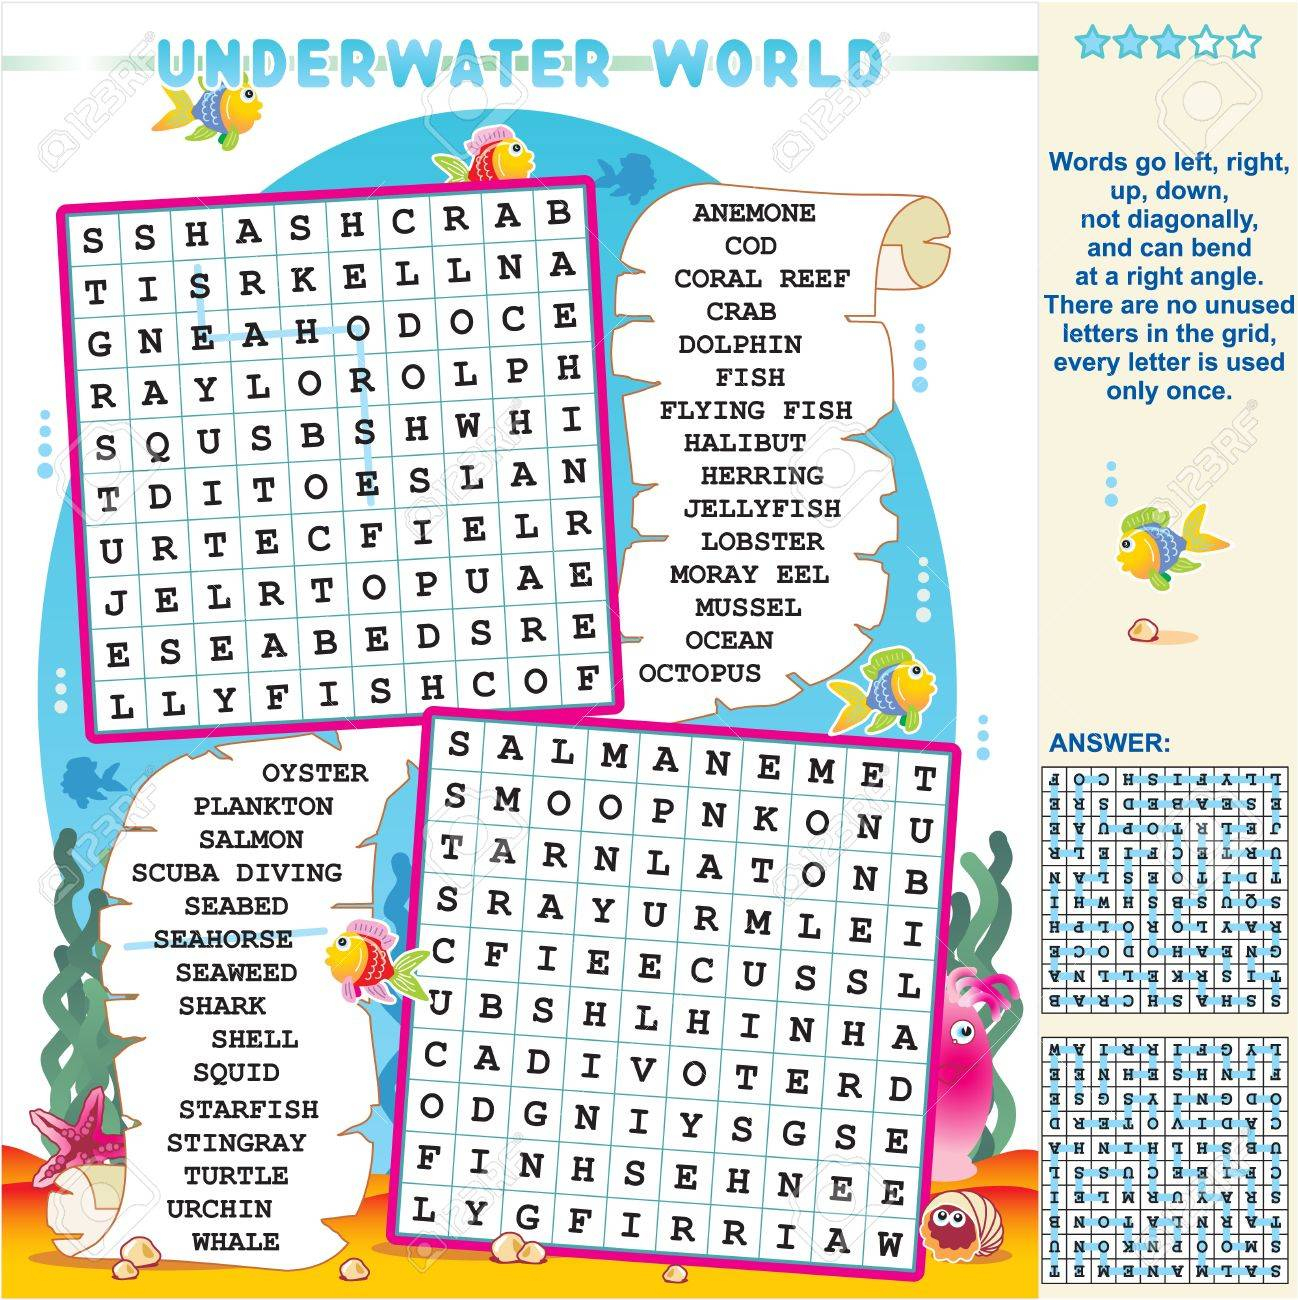 Underwater World Zigzag Word Search Puzzle, Answer Included